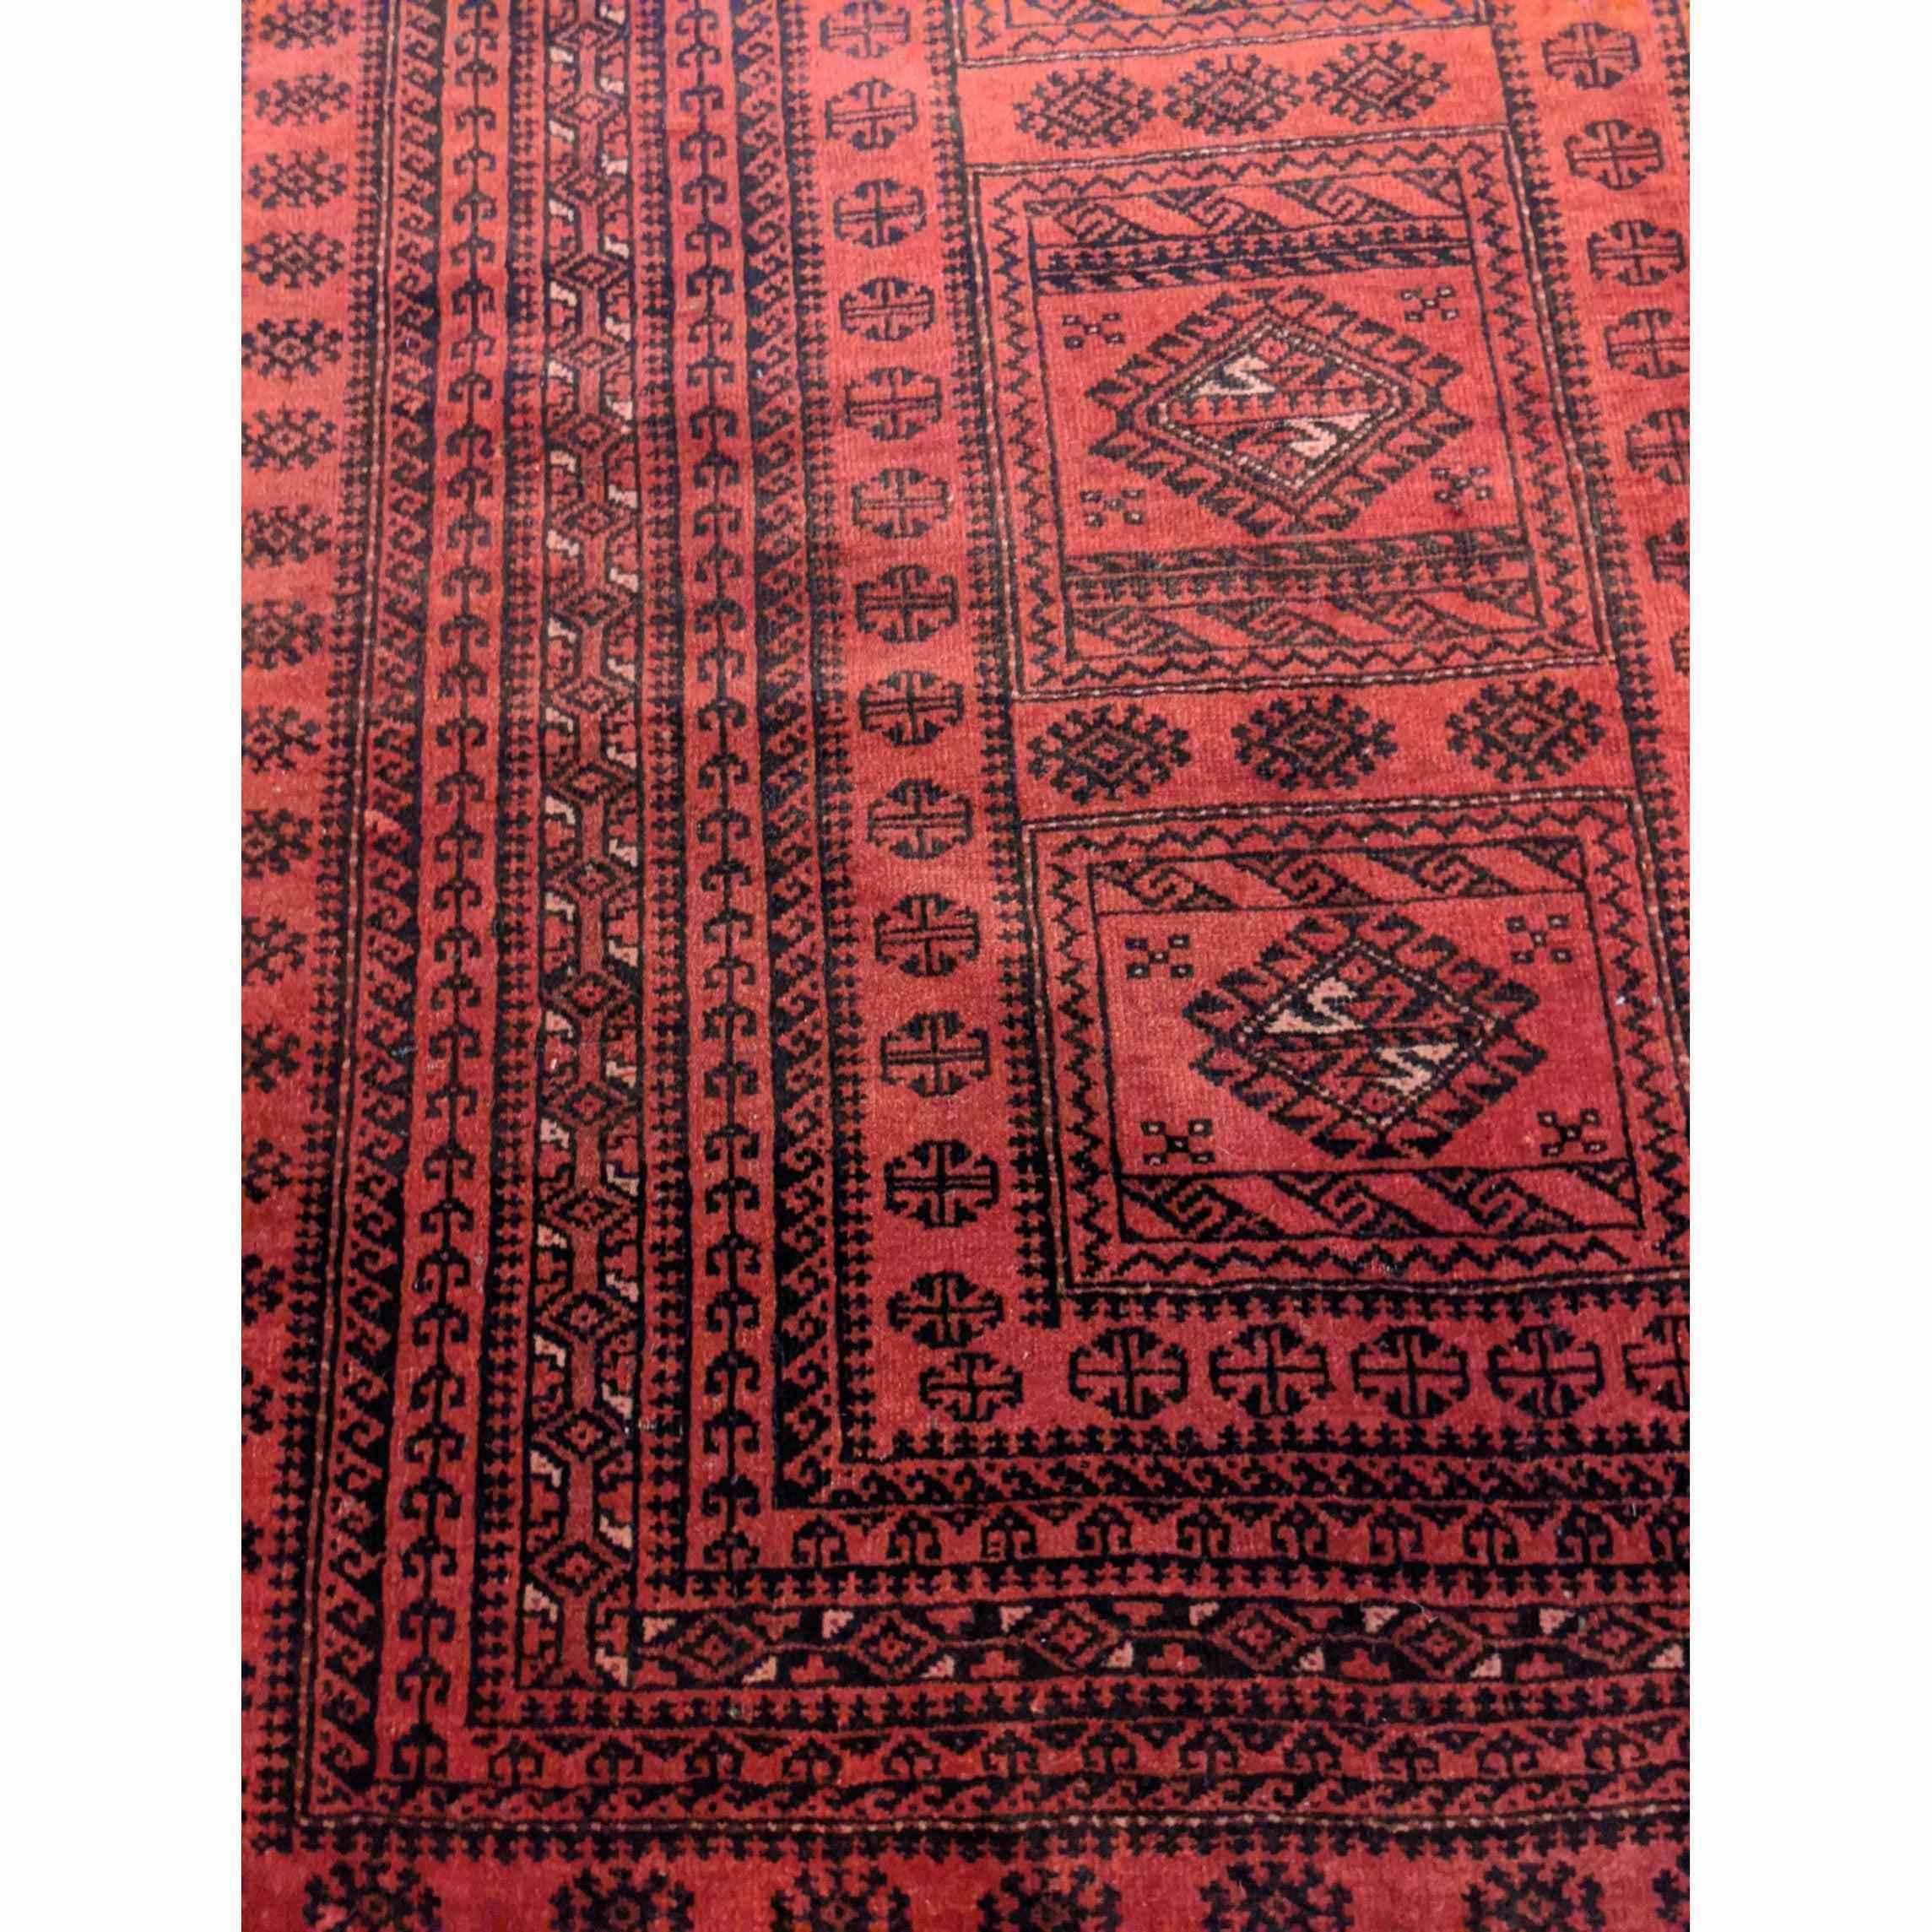 192 x 110 cm Fine Old Persian Baluch Traditional Red Rug - Rugmaster